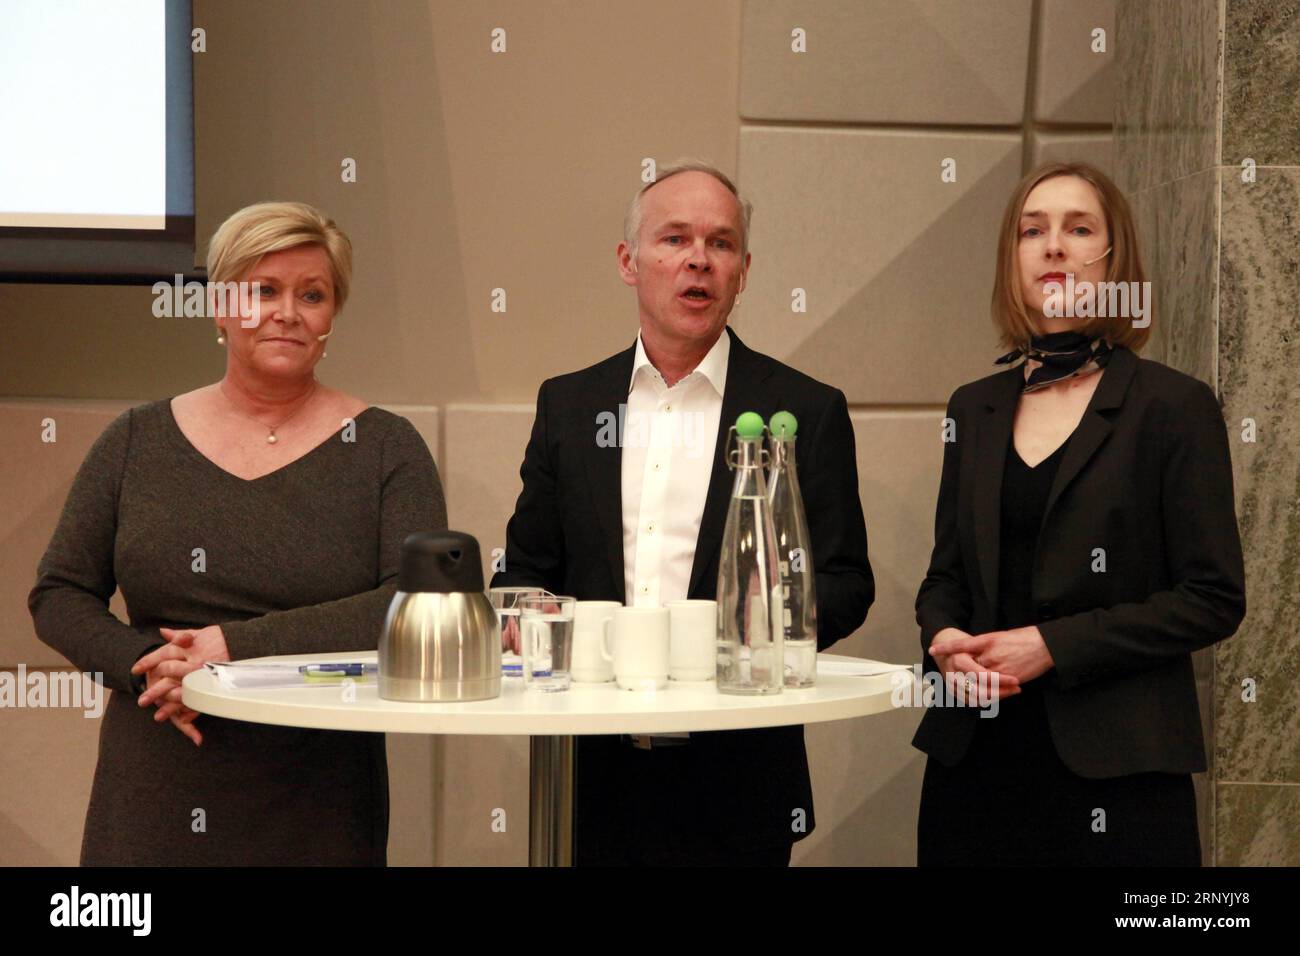 (180324) -- OSLO, March 24, 2018 -- Norwegian Minister of Education and Integration Jan Tore Sanner (C), Minister of Research and Higher Education Iselin Nybo (R) and Minister of Finance Siv Jensen attend a press conference in Olso, Norway, on March 23, 2018. Norway said on Friday it sent a bill to parliament proposing to ban the use of face-covering garments in all kindergartens and educational institutions such as schools, colleges and training centers for newly arrived immigrants. )(axy) NORWAY-OSLO-SCHOOL-FACE-COVERING GARMENTS-BAN-PROPOSAL LiangxYouchang PUBLICATIONxNOTxINxCHN Stock Photo